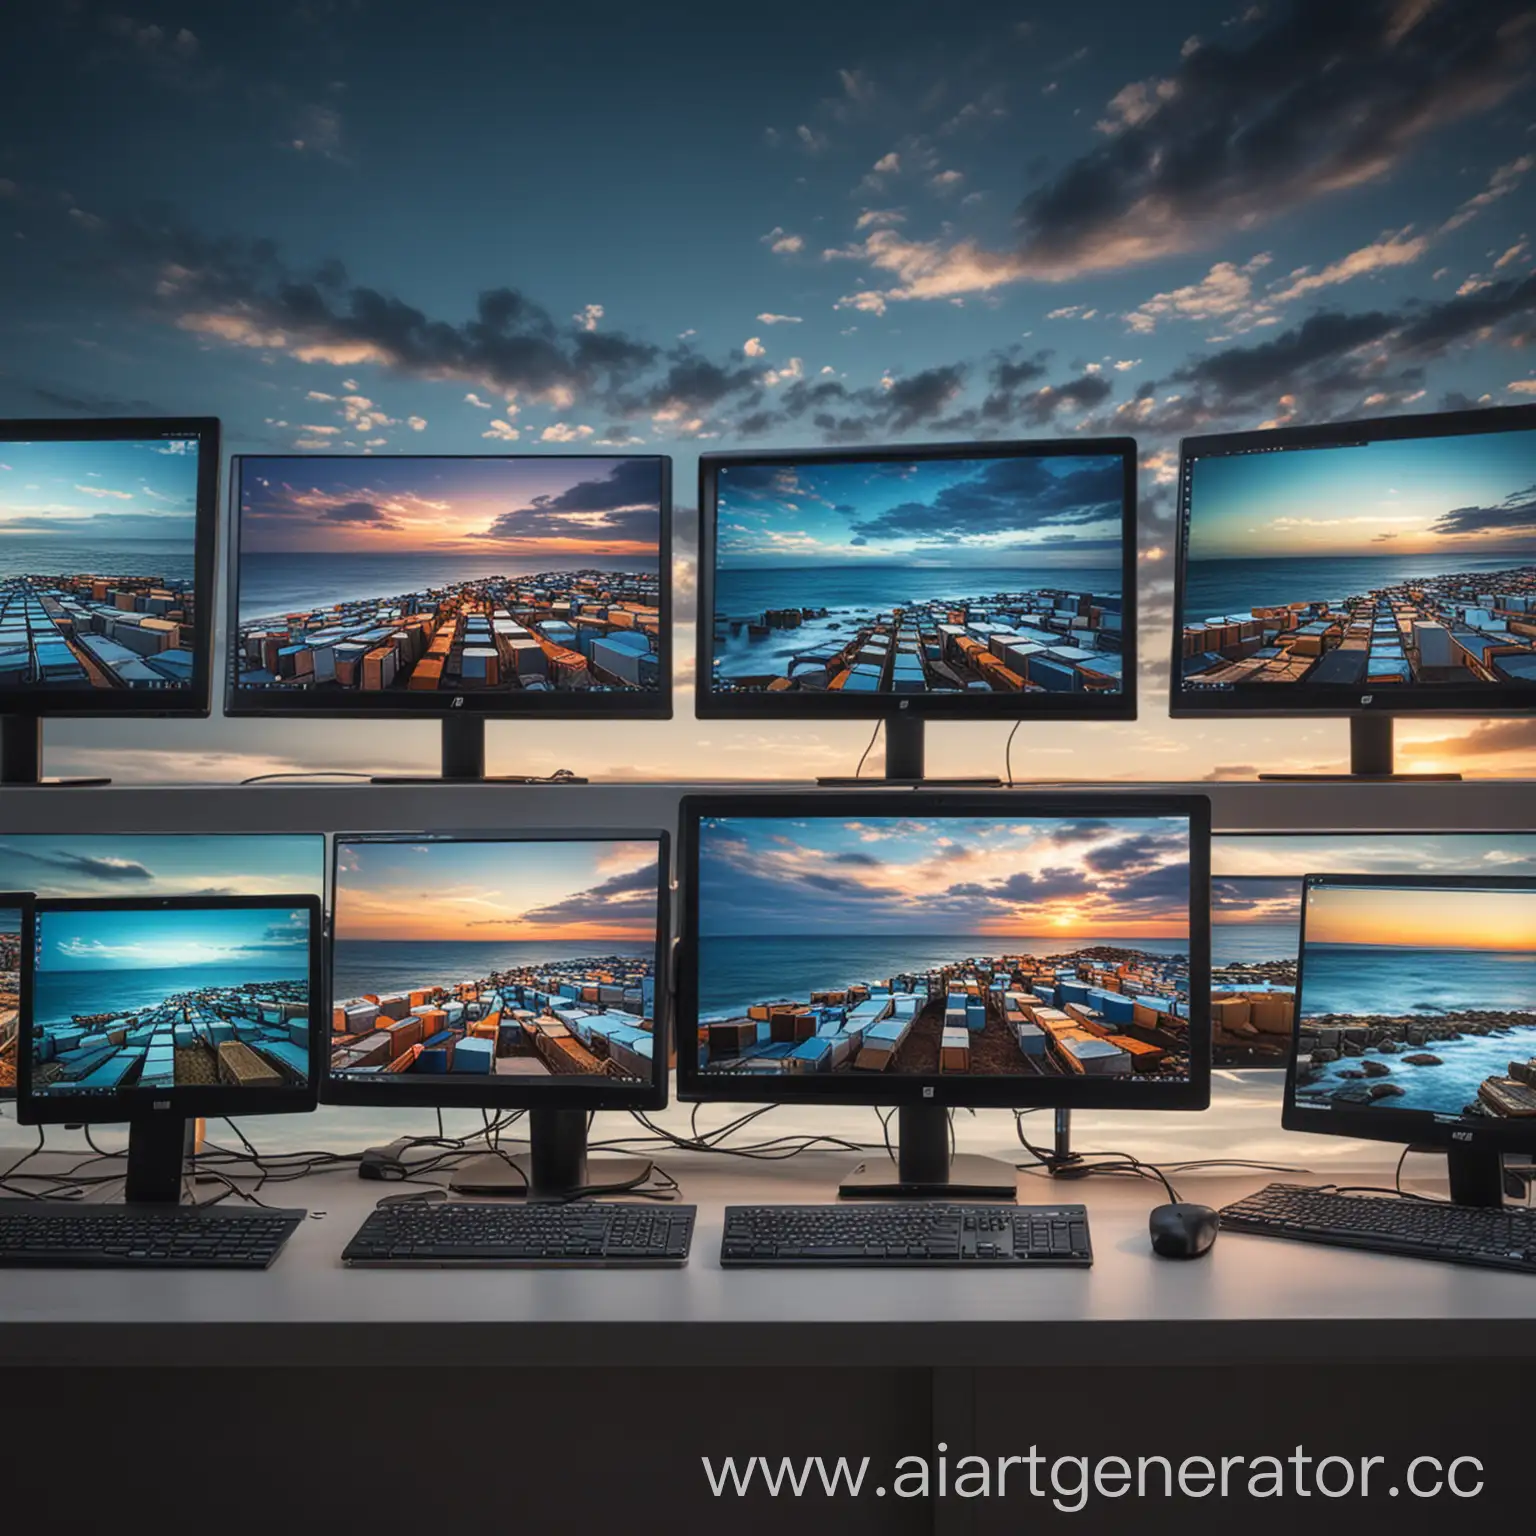 Array-of-Technology-Laptops-Computers-and-Monitors-in-Mesmerizing-Display